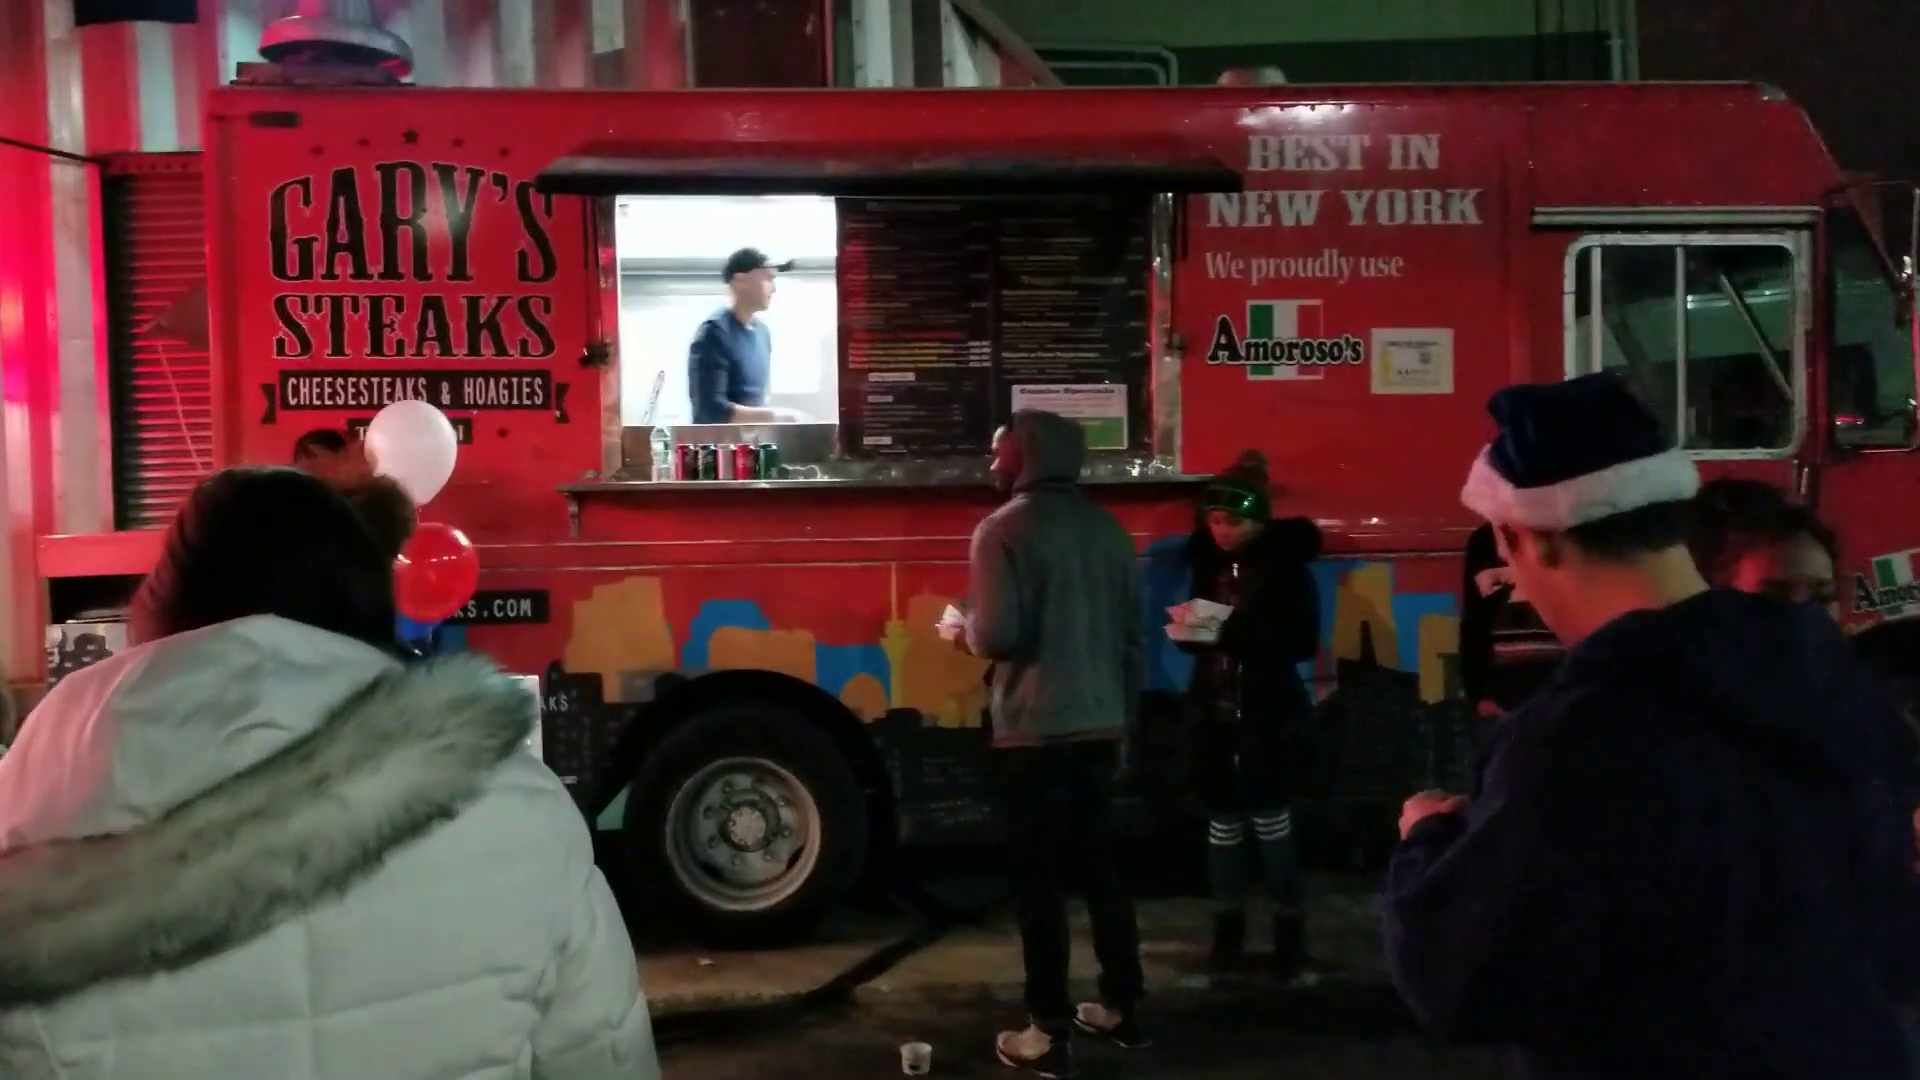 Garyssteaks Food truck catering at the Steiner Studios facility in Brooklyn NY